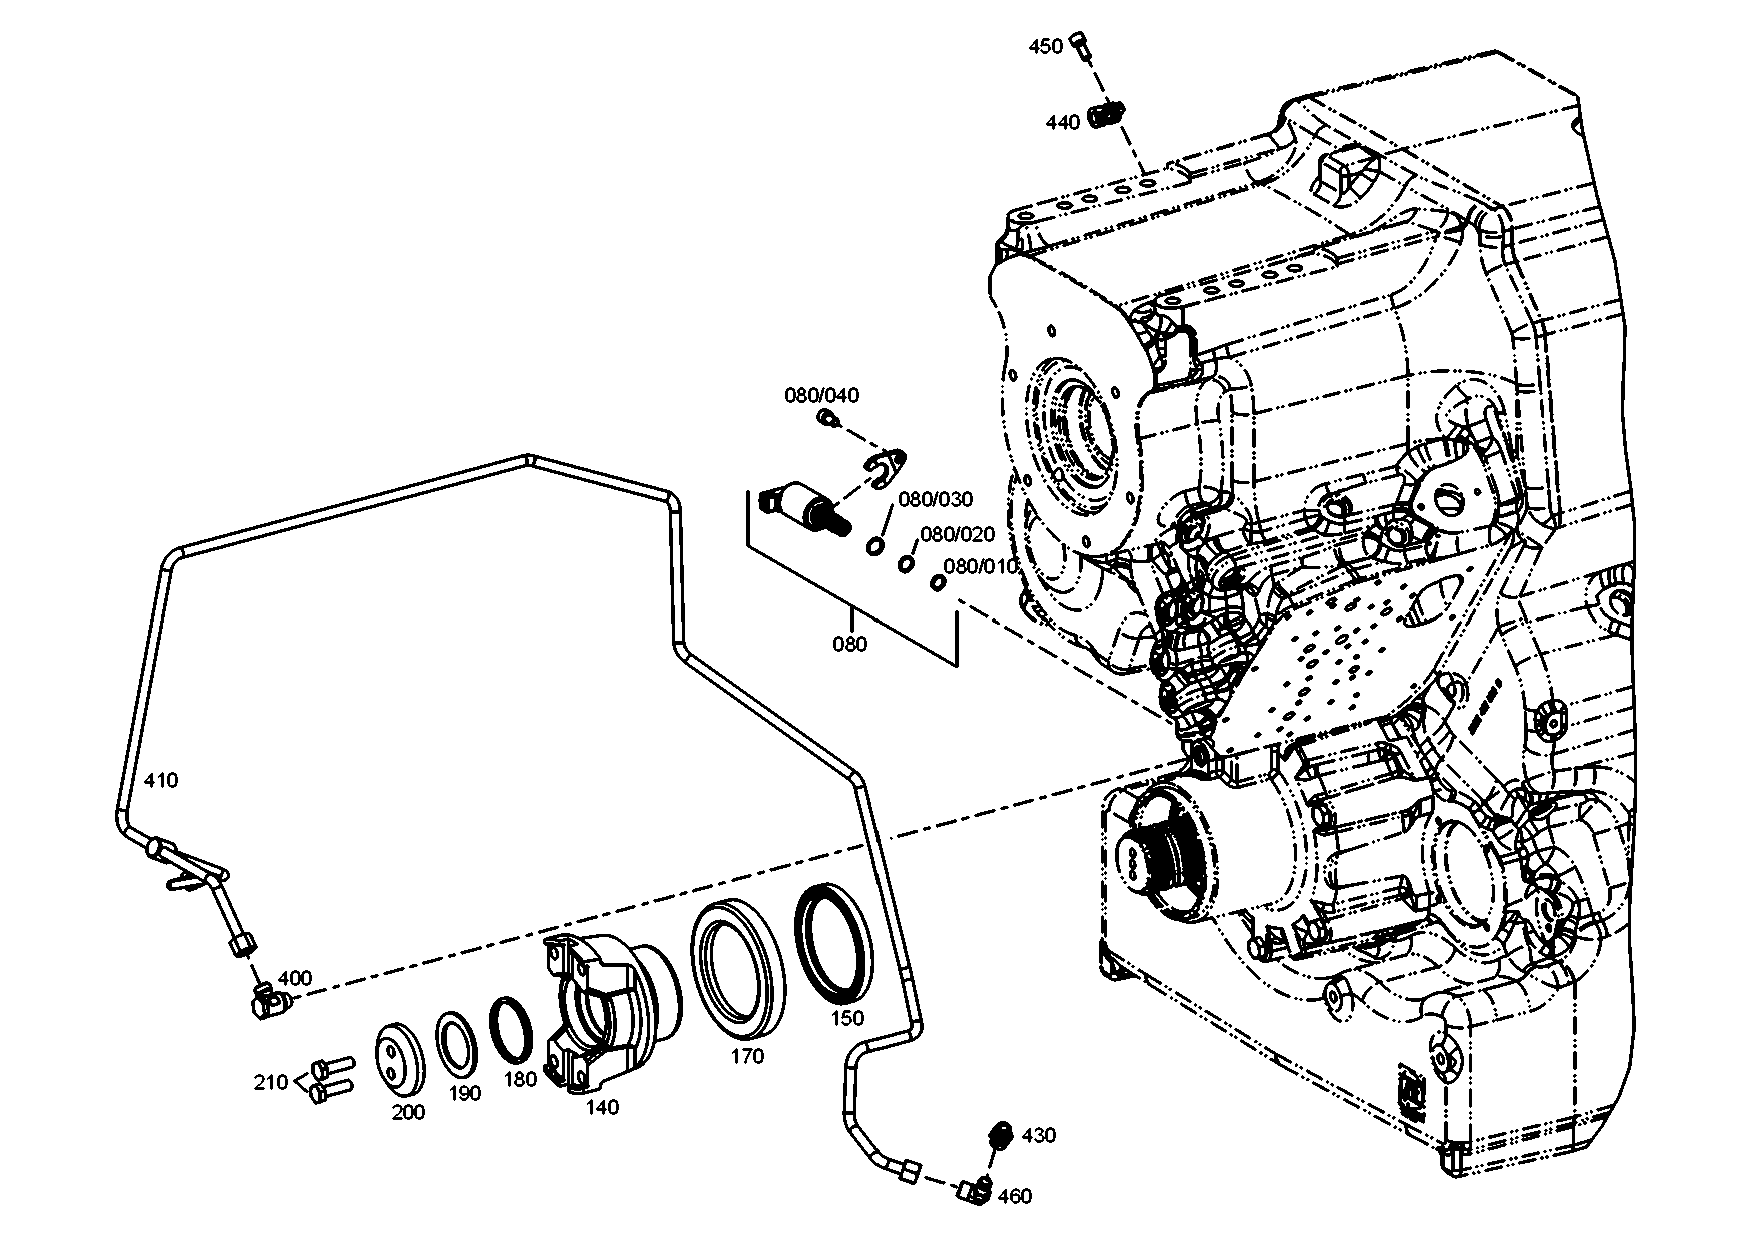 drawing for AGCO V35031100 - END SHIM (figure 4)